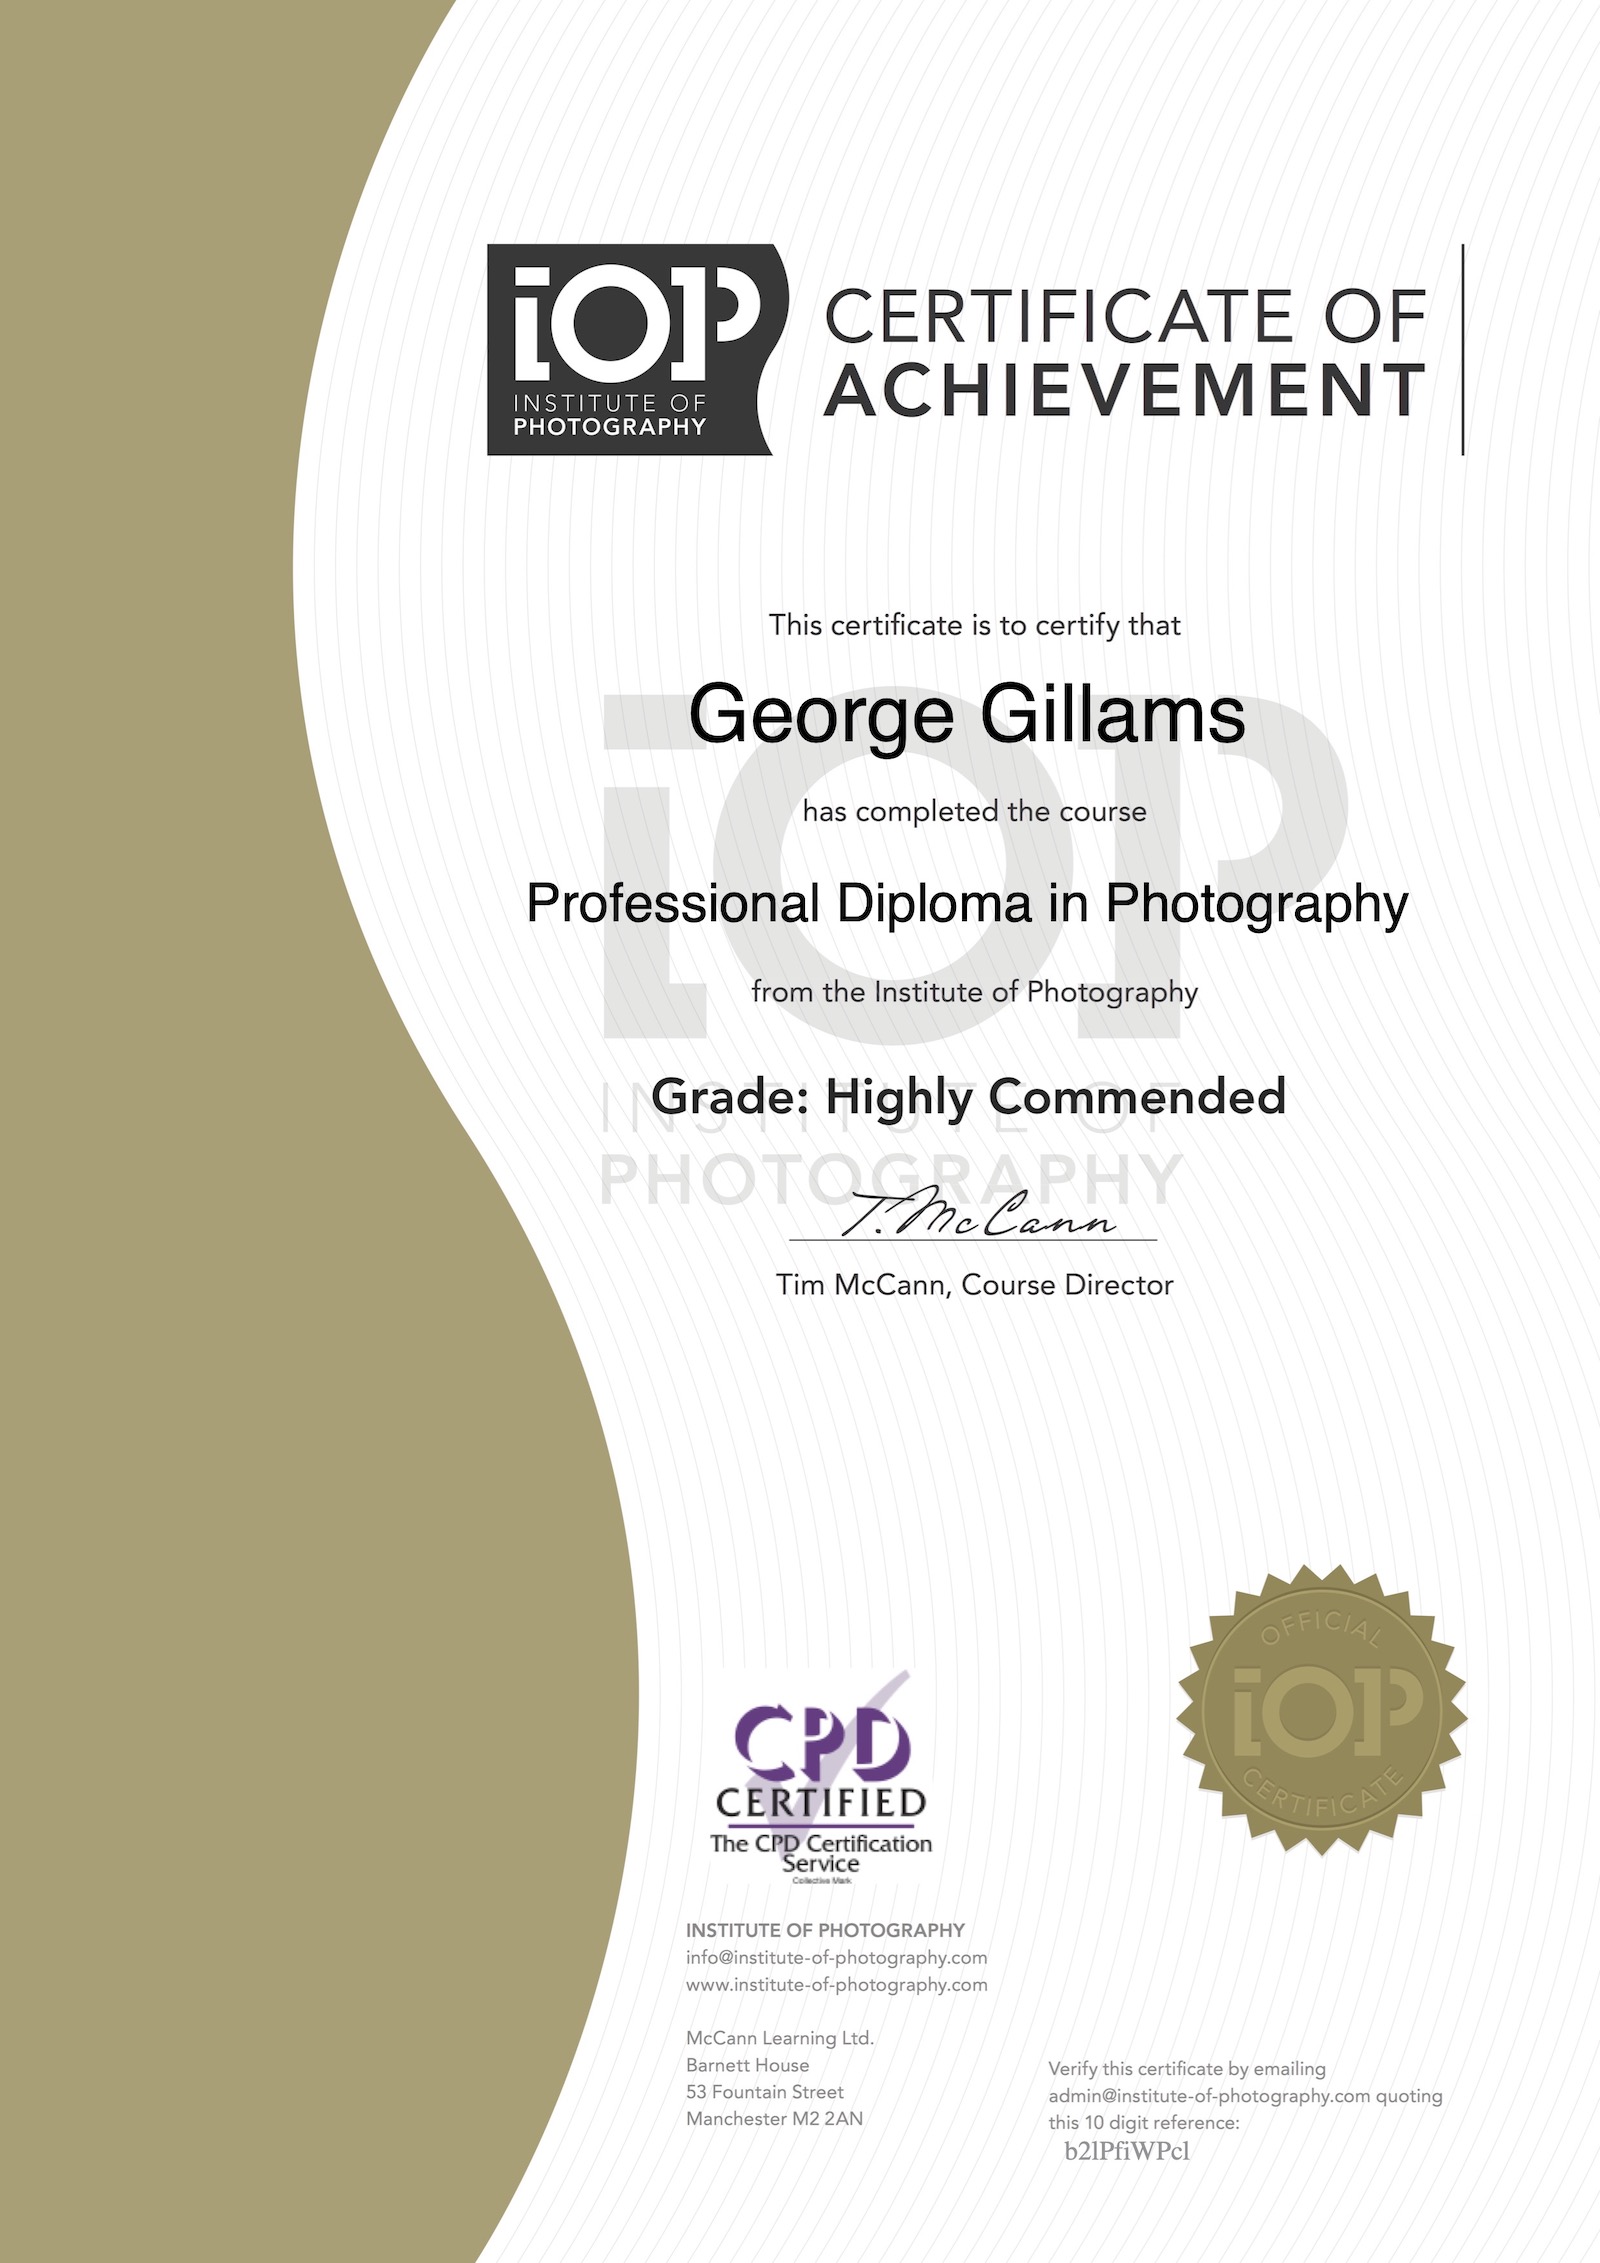 Certificate of Completion of the Professional Diploma in Photography.